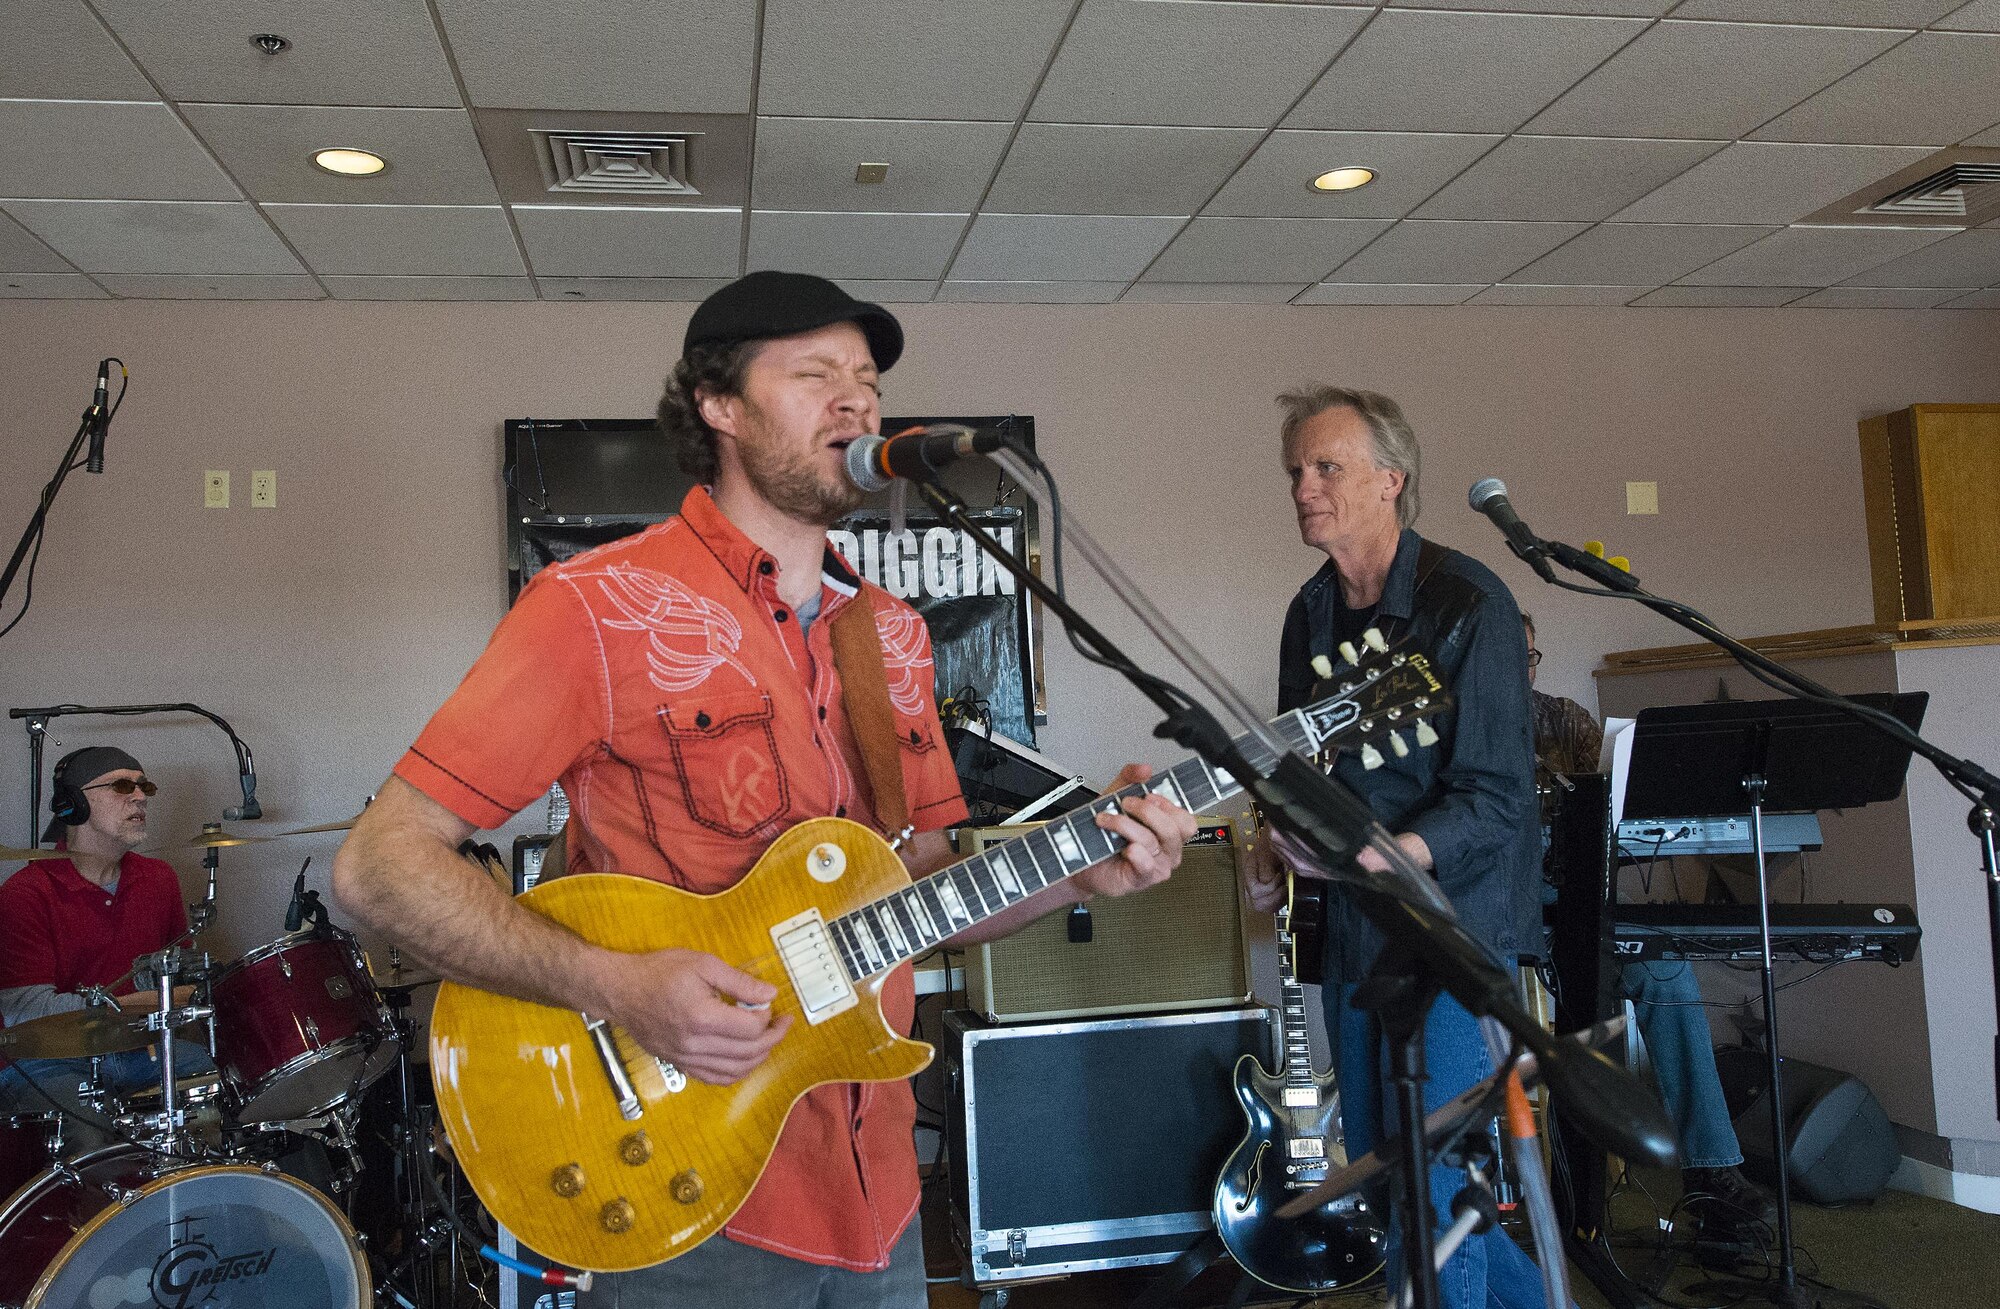 Brooks Hoover, singer; Dan Qualkinbush, bass guitar; and Paul Howe, drums; perform with the rest of the classic-rock band Moe Diggin April 1, 2016, at the Trail’s End Event  Center grand opening on F.E. Warren Air Force Base, Wyo. The center’s Wrangler Lounge will be open each weekend and other facilities can be booked for events. (U.S. Air Force photo by R.J. Oriez)